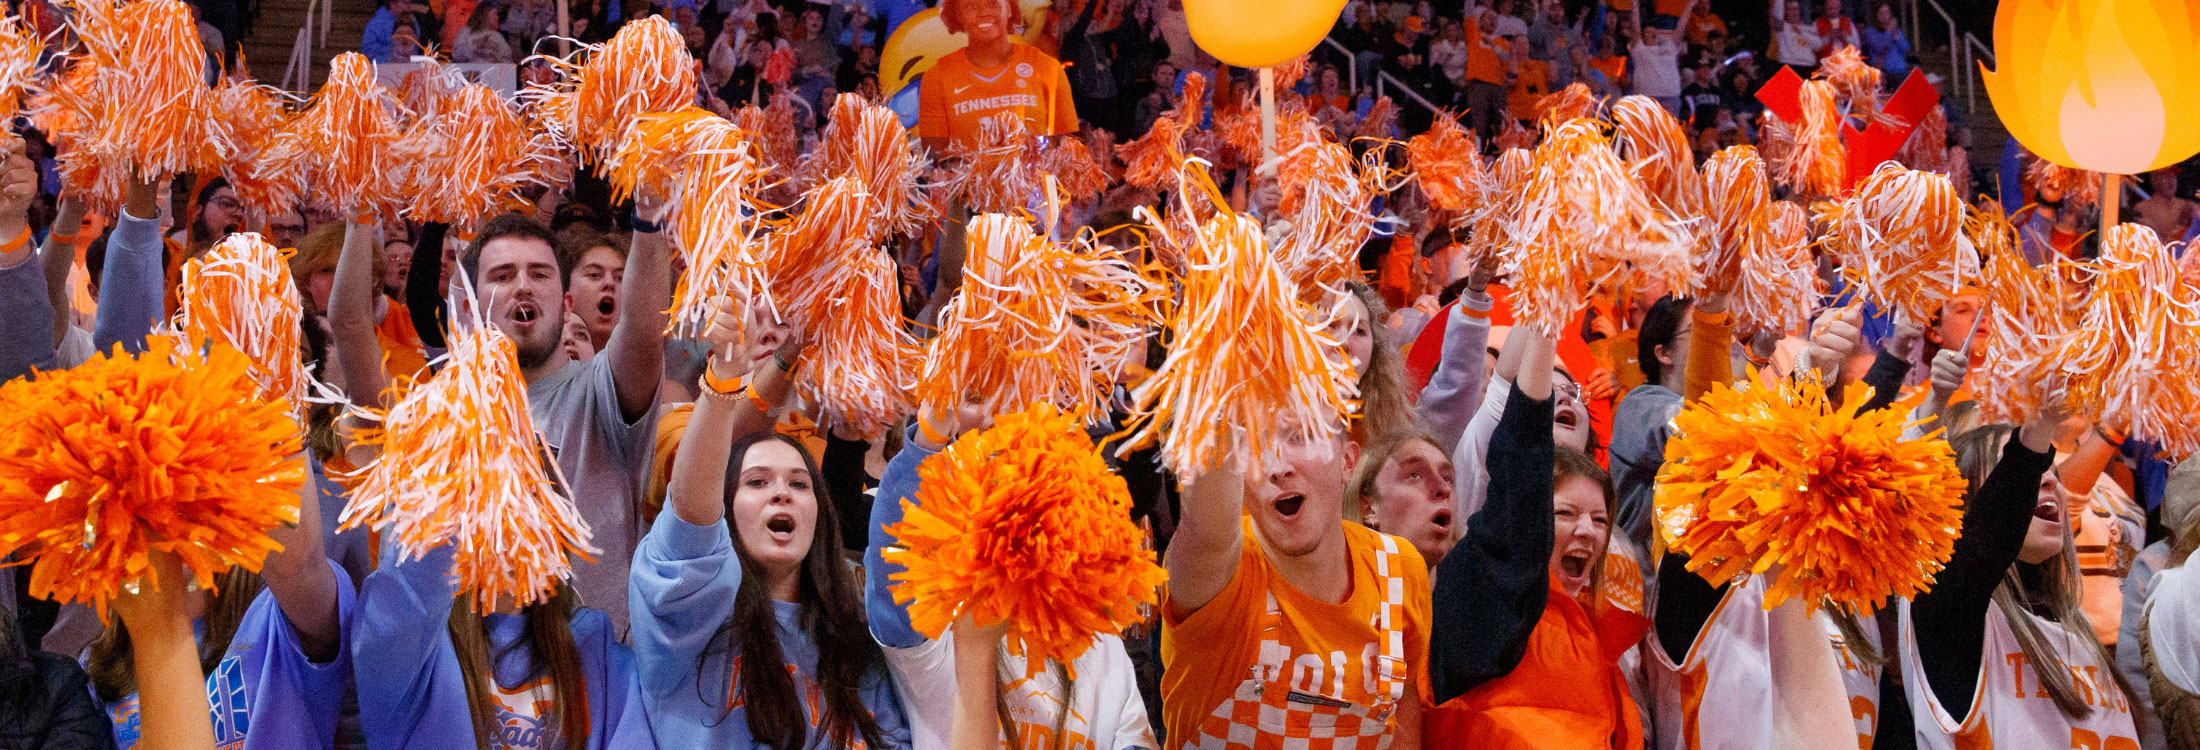 The student section at the UT Lady Vols basketball game shake their orange and white pom poms to the camera up close.